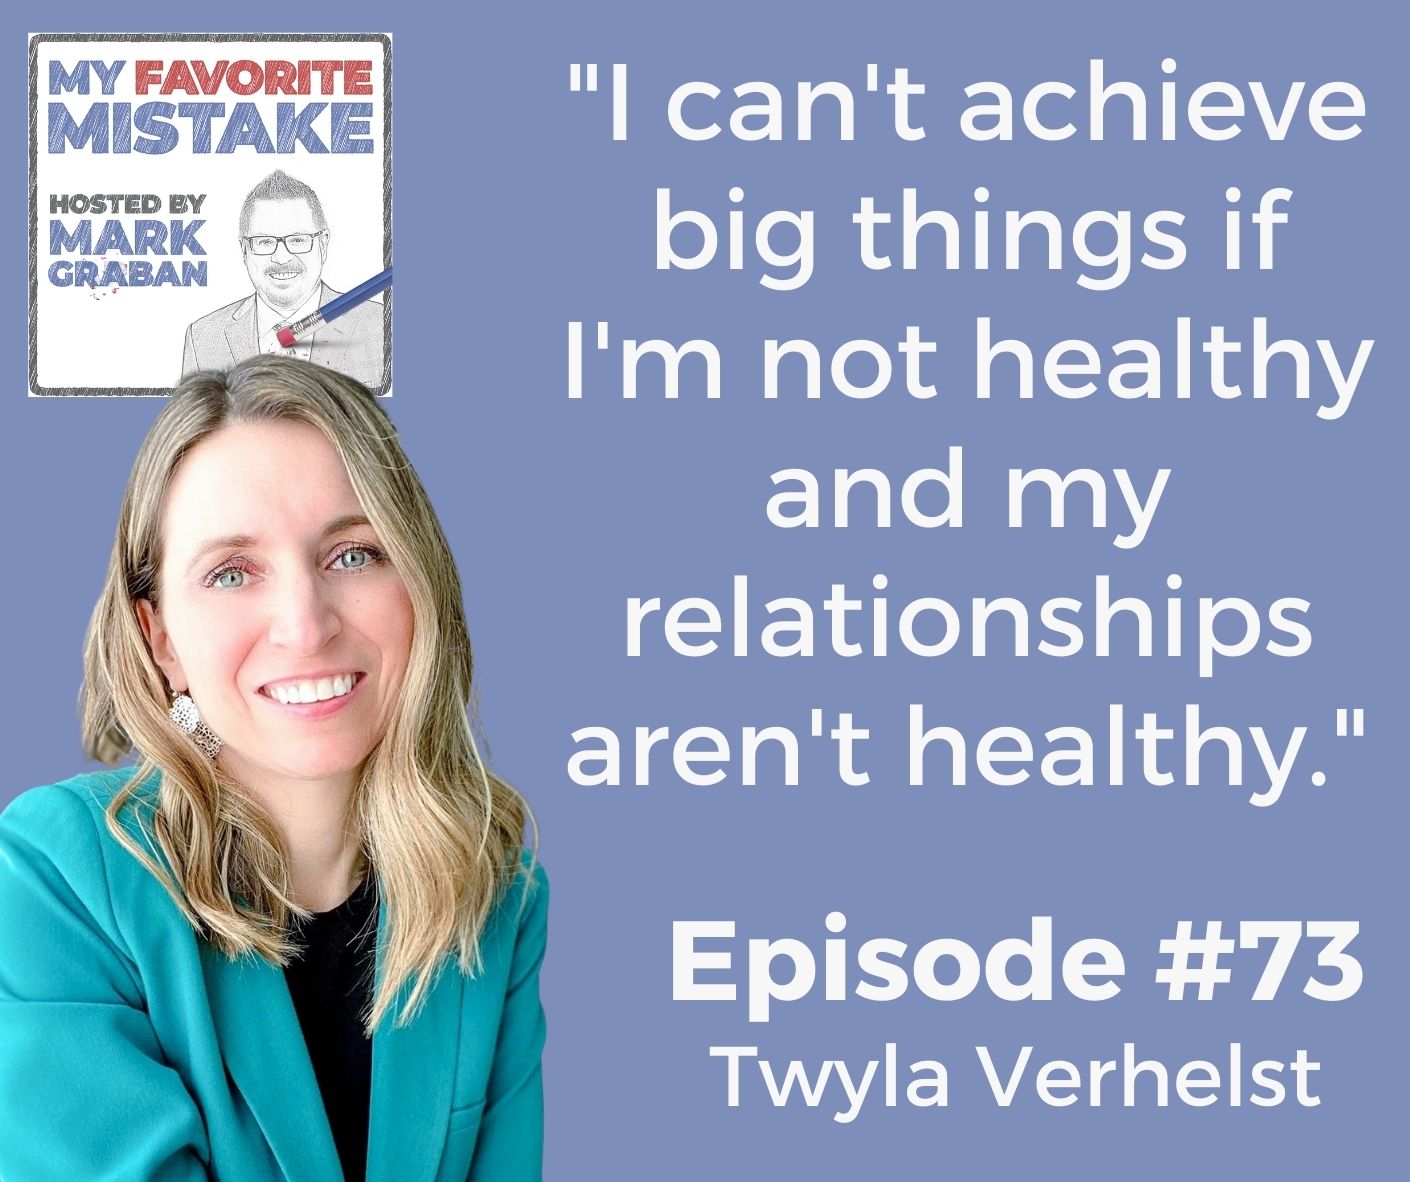 "I can't achieve big things if I'm not healthy and my relationships aren't healthy."